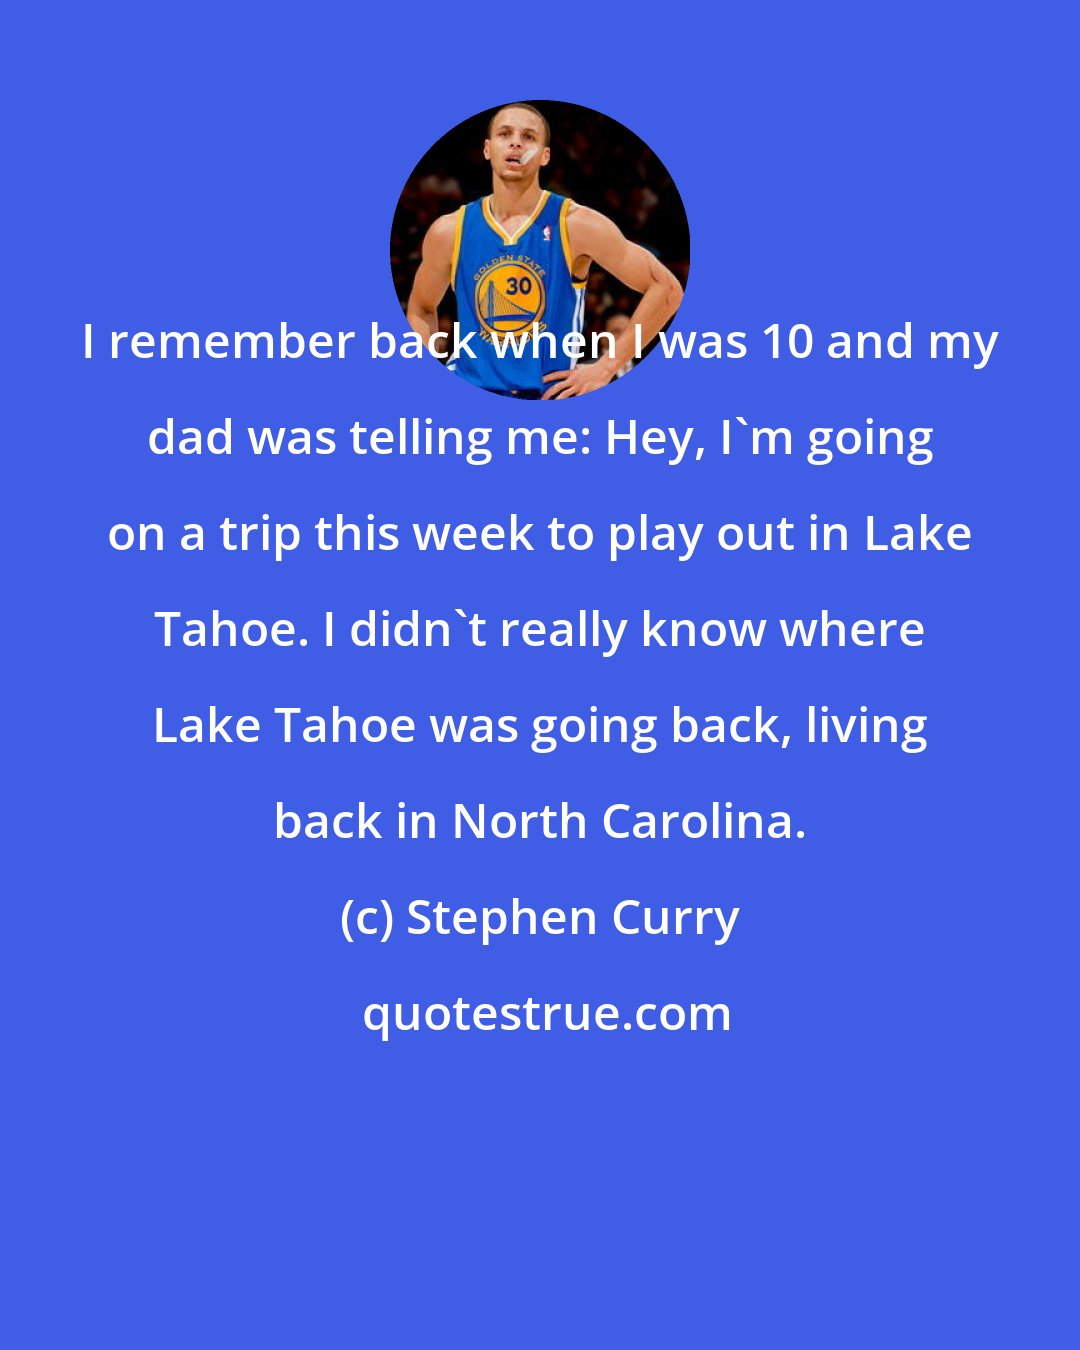 Stephen Curry: I remember back when I was 10 and my dad was telling me: Hey, I'm going on a trip this week to play out in Lake Tahoe. I didn't really know where Lake Tahoe was going back, living back in North Carolina.